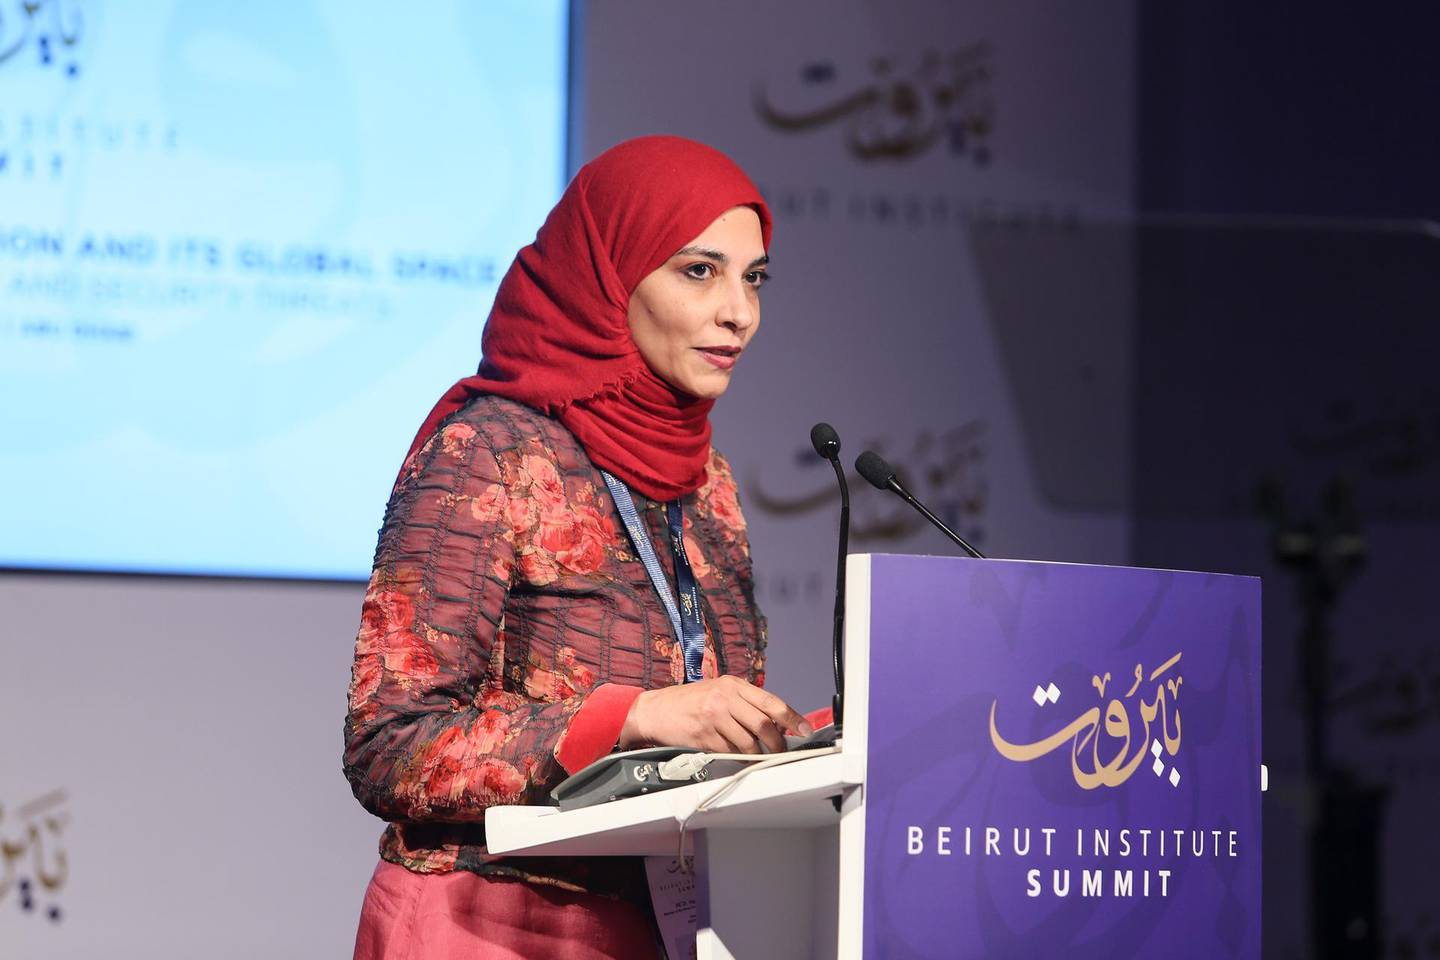 ABU DHABI, UAE. October 10, 2015 -Dr. Hayat Sindi, member of the Shura Council, CEO and founder of i2institute, speaks during the The Beirut Institute Summit at St. Regis Abu Dhabi, October 10, 2015. (Photo by: Sarah Dea/The National, Story by: Roberta Pennington/News) *** Local Caption ***  SDEA101015-beirutsummit26.JPG